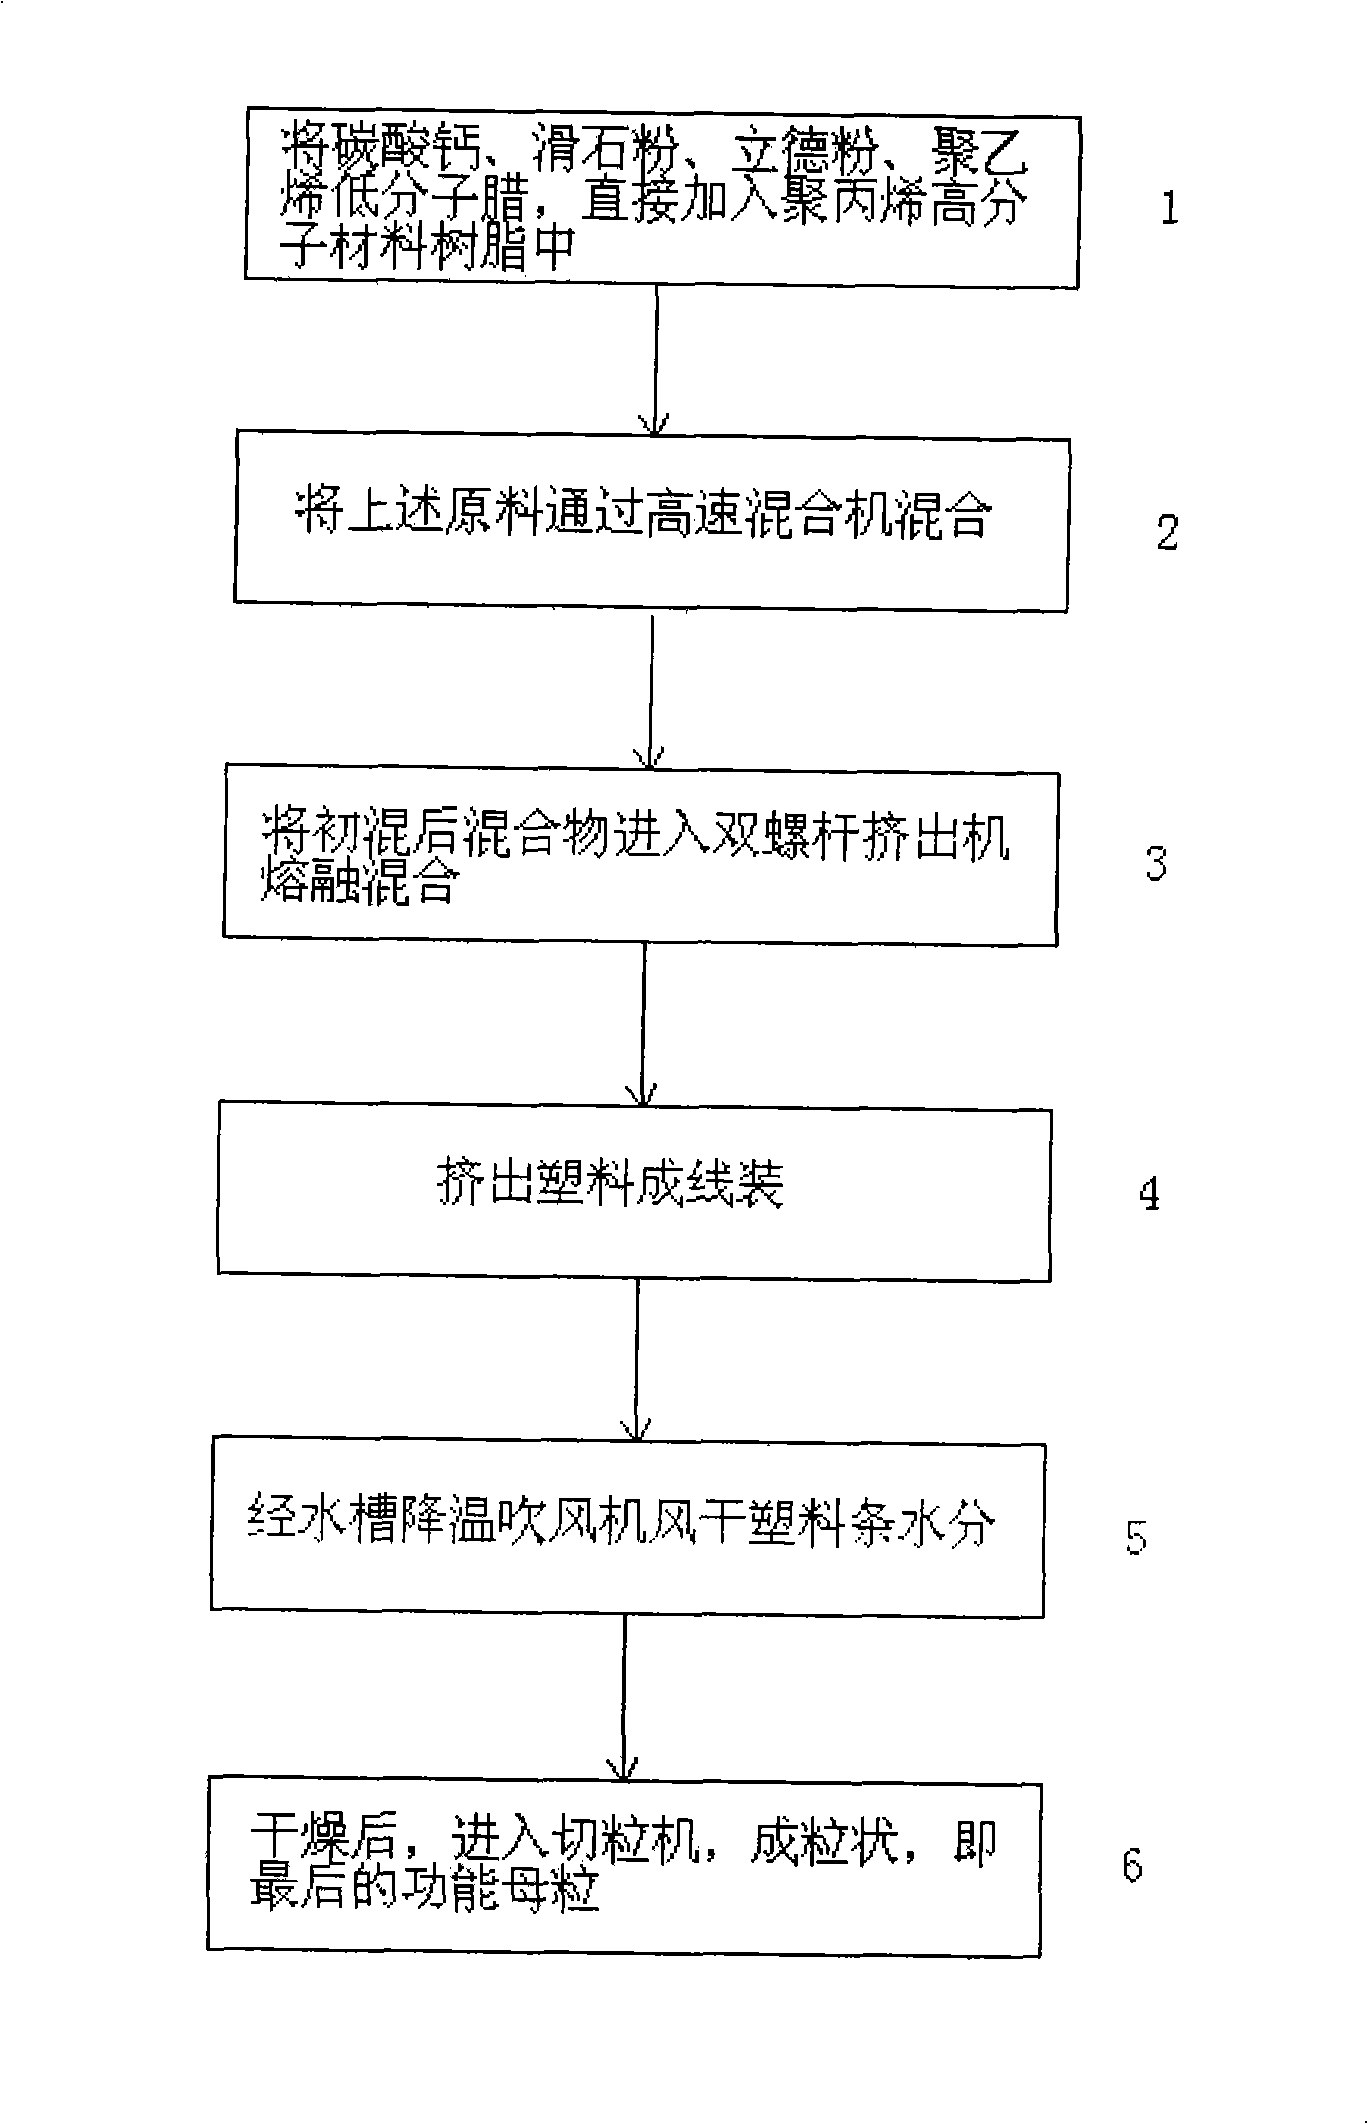 Antibacterial plastic sheet-like chopping board and manufacturing method thereof